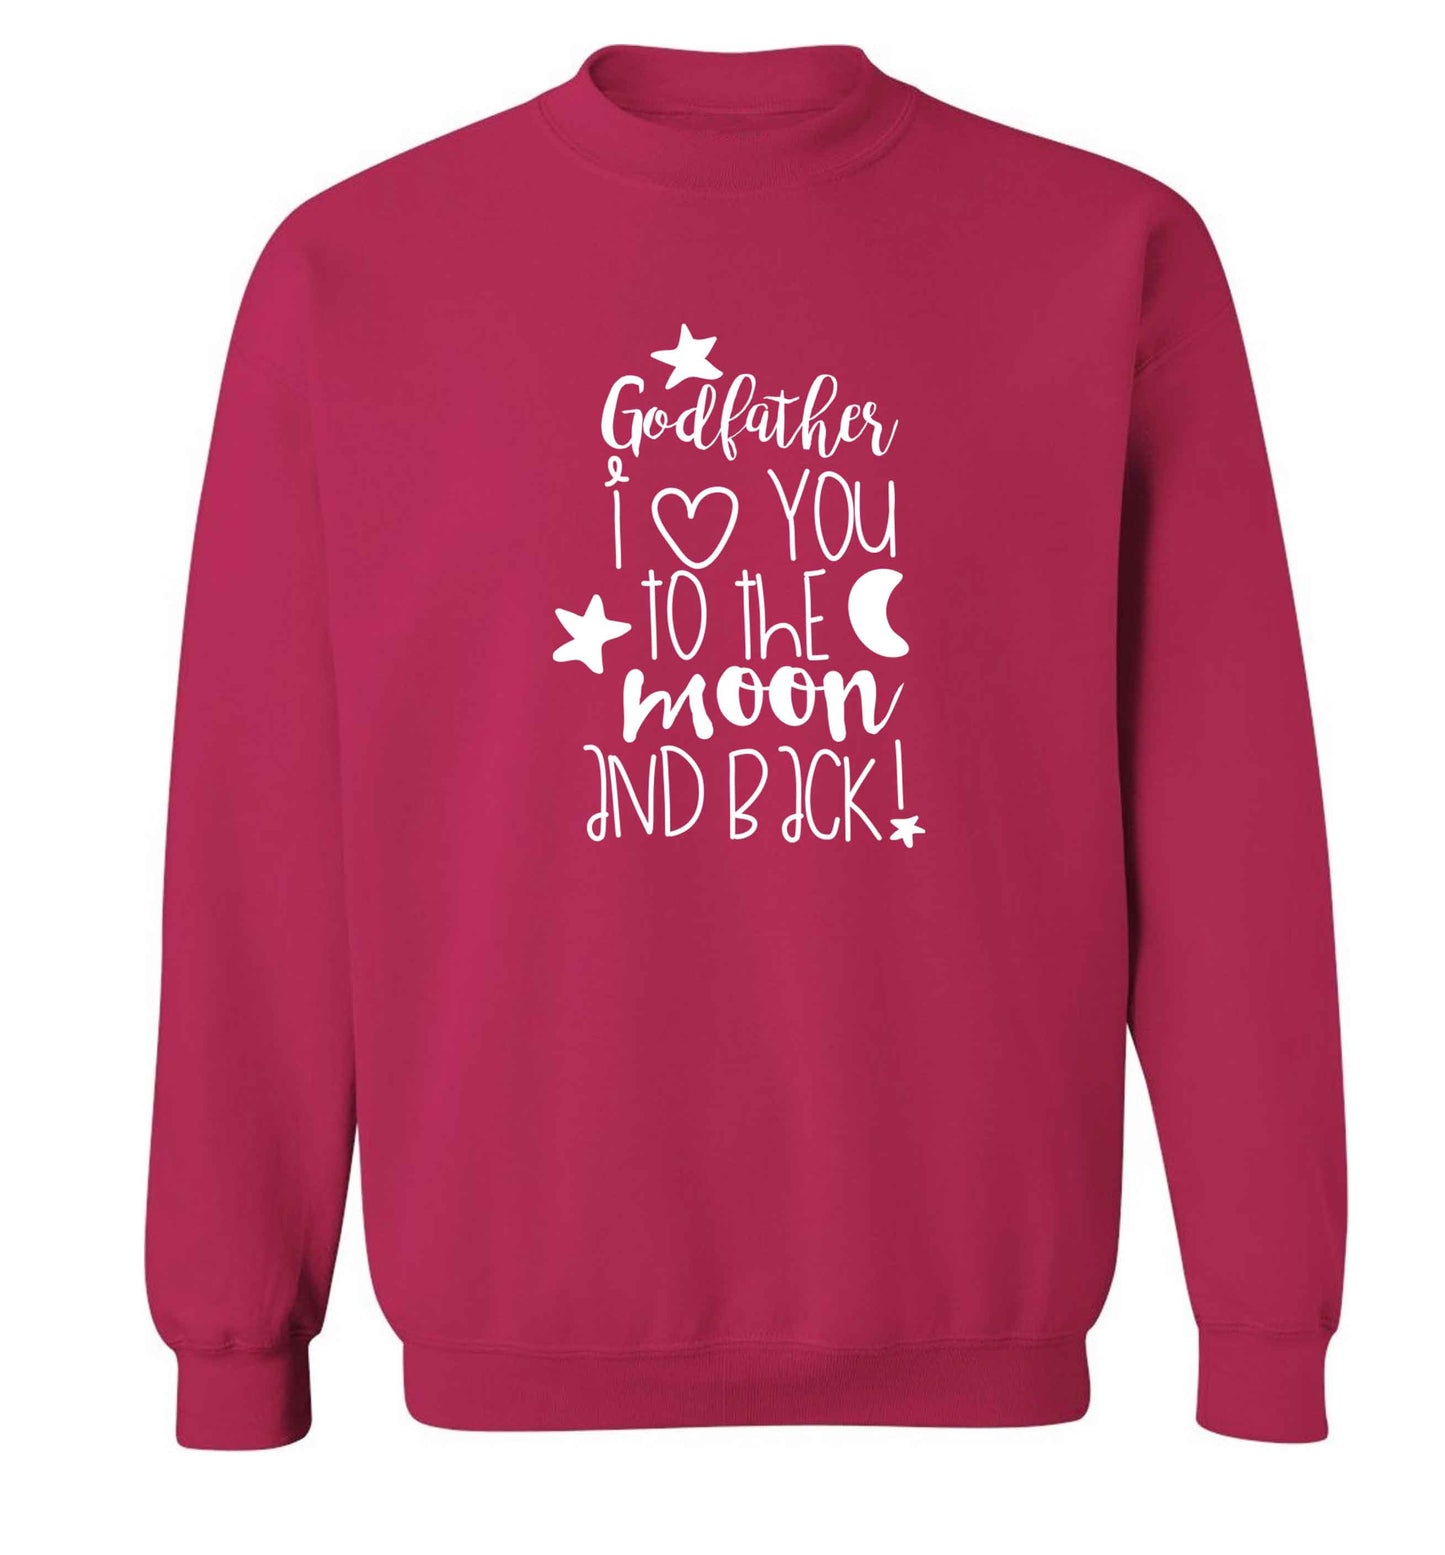 Godfather I love you to the moon and back adult's unisex pink sweater 2XL